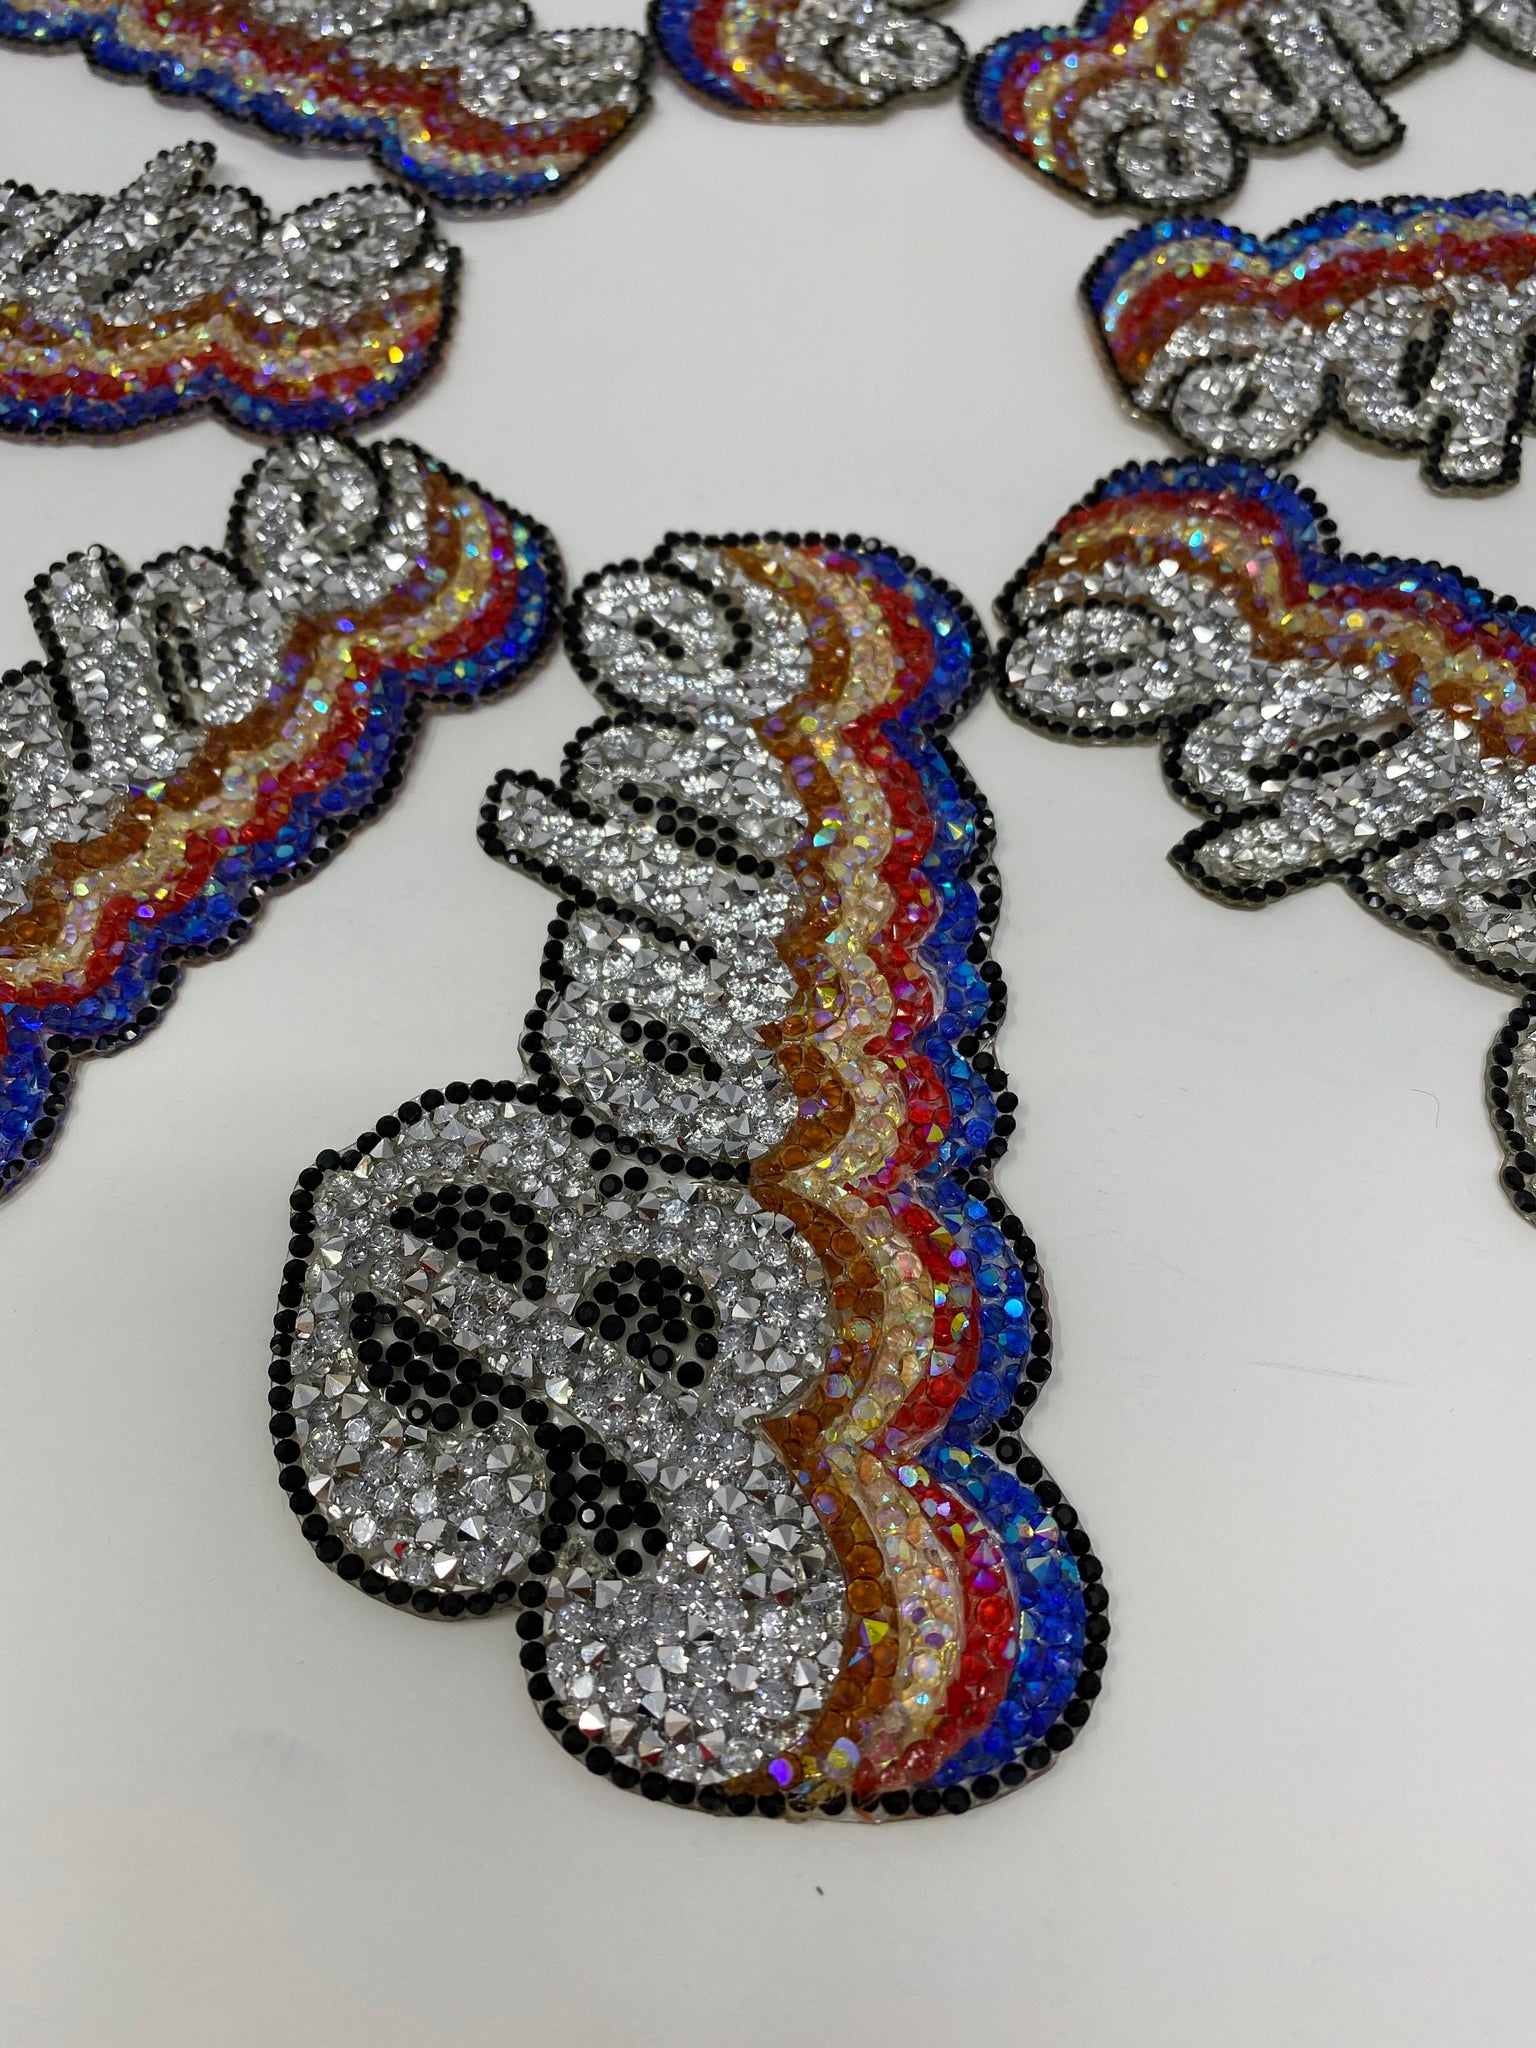 NEW Arrival, Blinged Out "Babe" Rhinestone Patch with Adhesive, Rhinestone Applique, Size 4"x2.5", Czech Rhinestones, DIY Applique